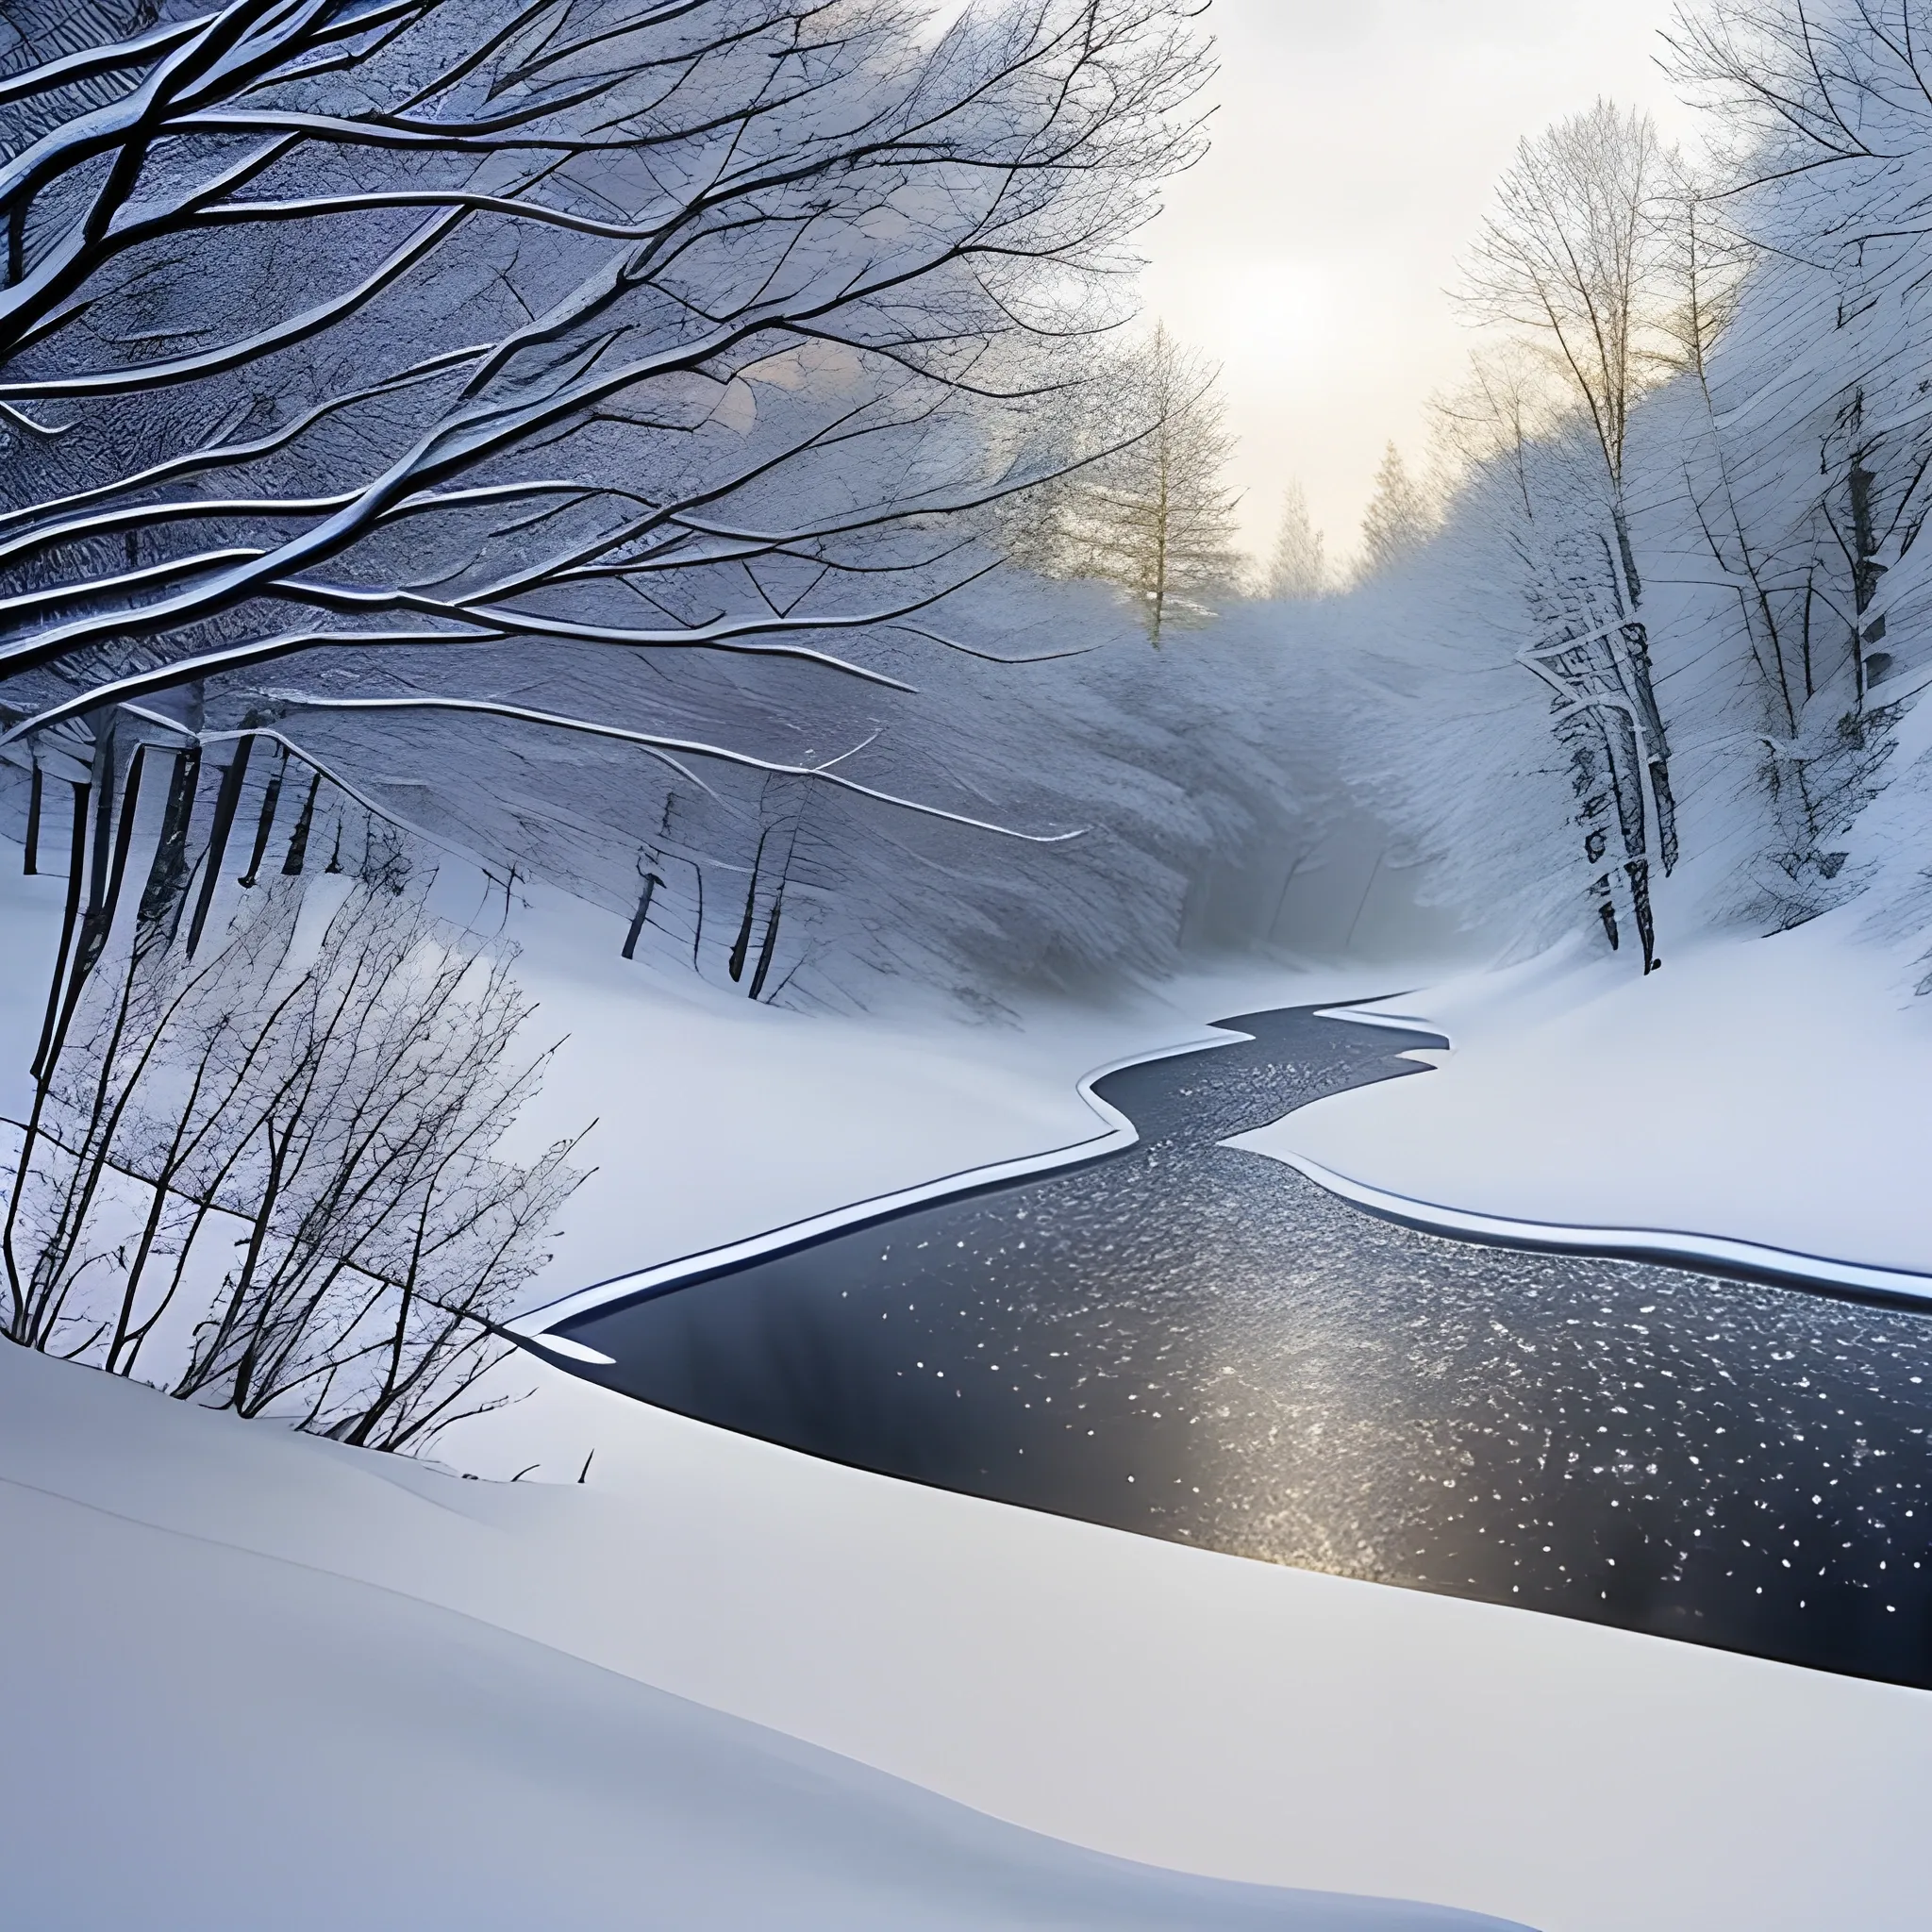 winter scenery, windy falling snow, snowy field with dark trees and a little river or lake in the middle, some white winter flowers, dark theme, sunrays between the trees